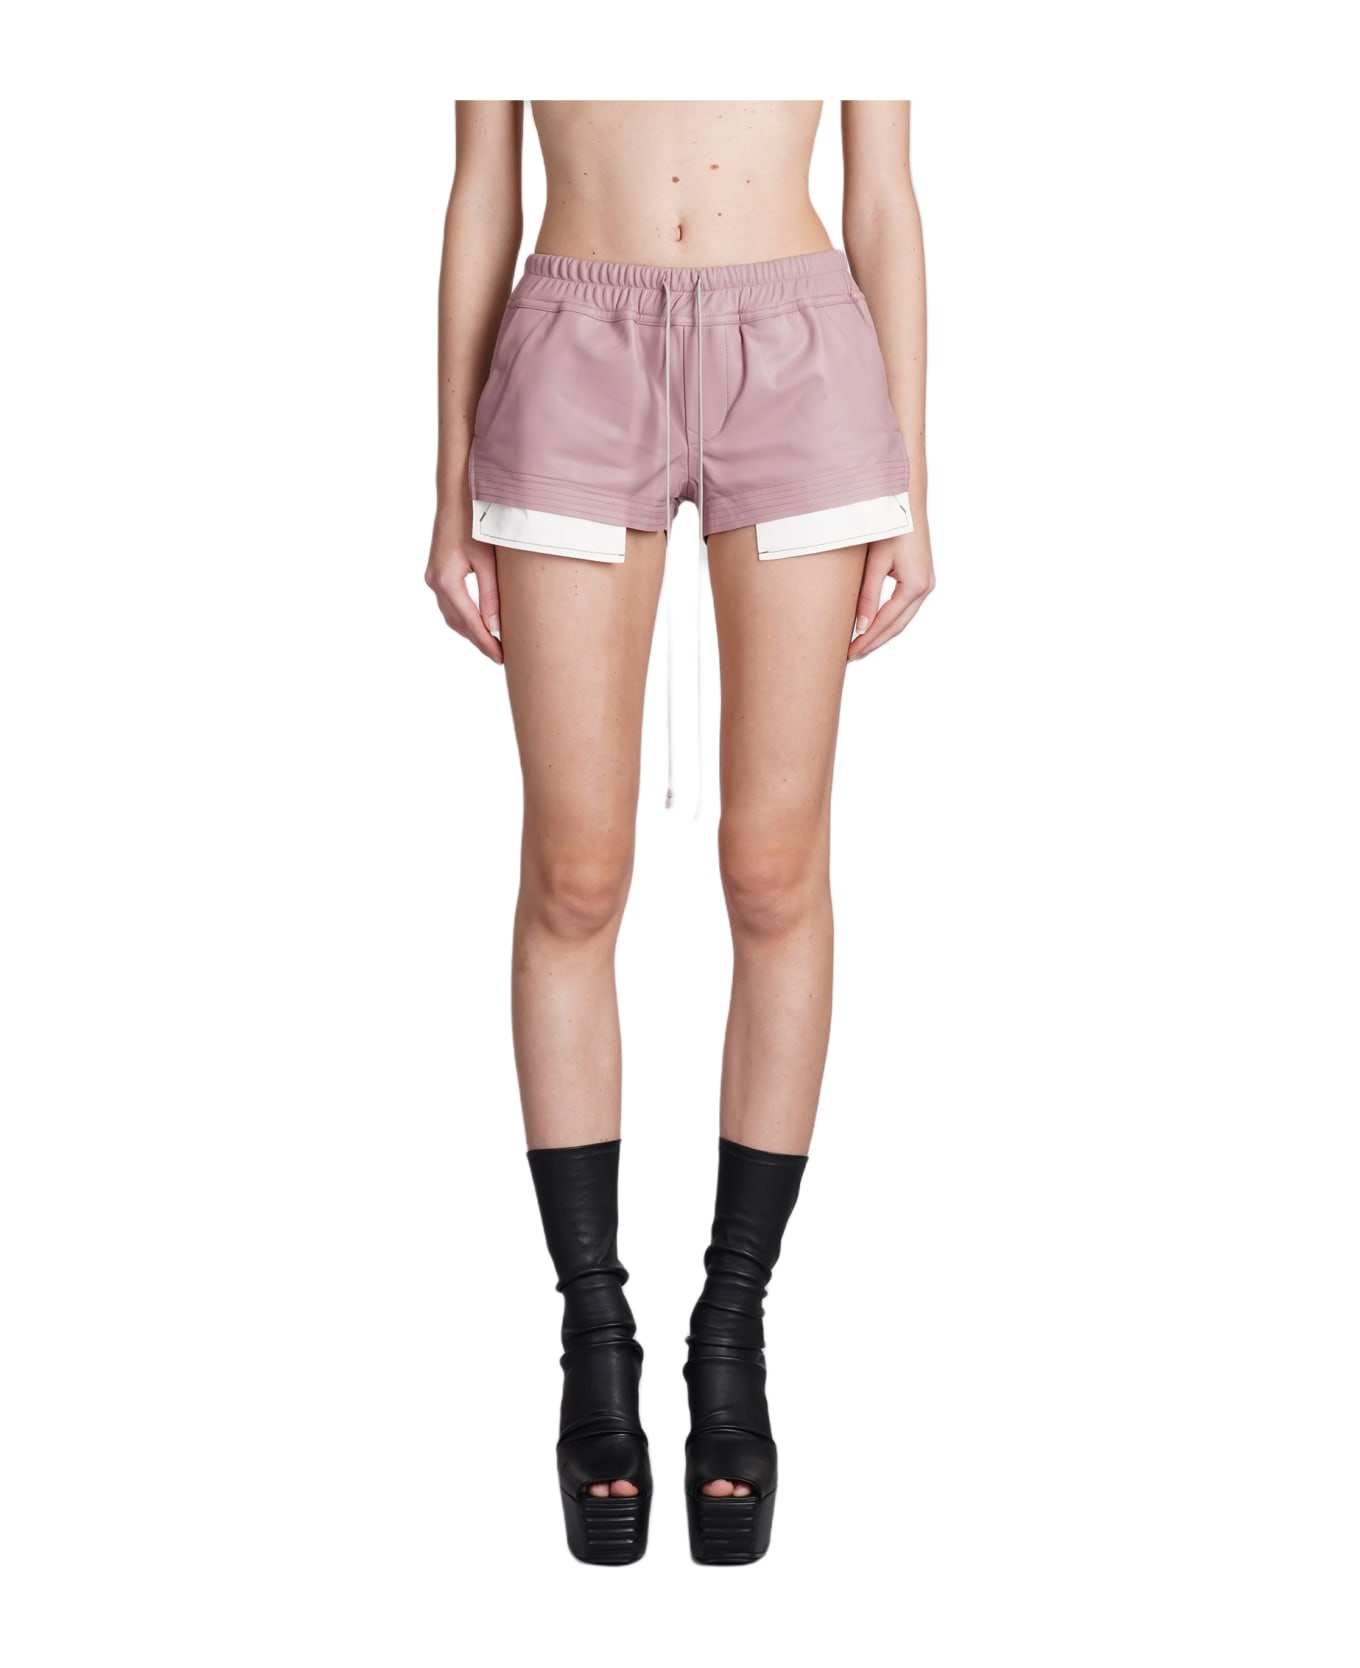 Rick Owens Fog Boxers Shorts In Rose-pink Leather - rose-pink